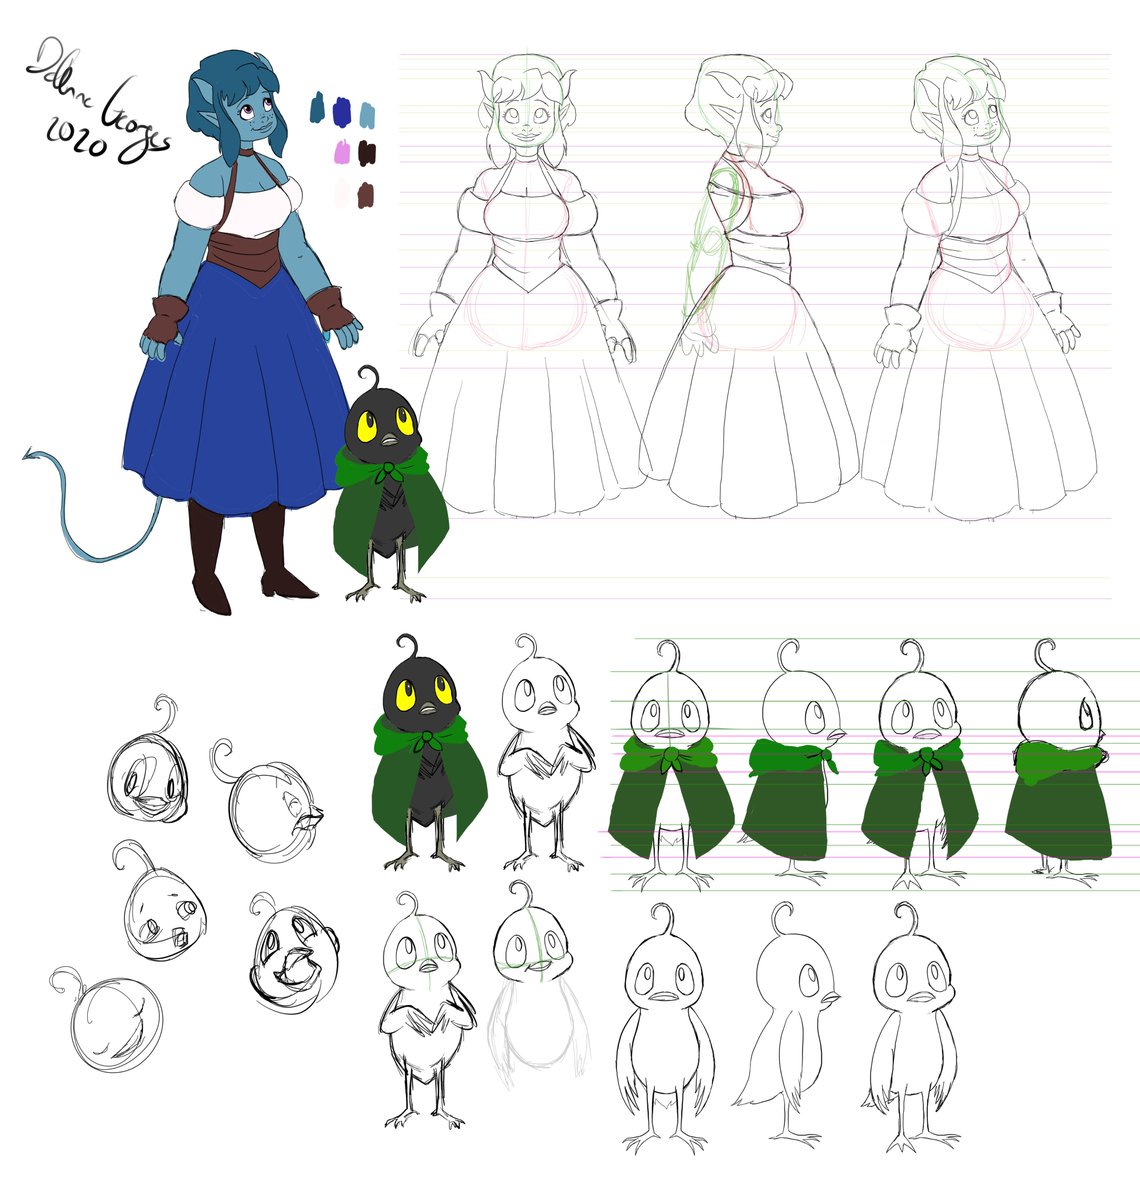 Don't think I ever posted my full design sheets for Kiri and Jester, but here they are!

#CriticalRoleArt 